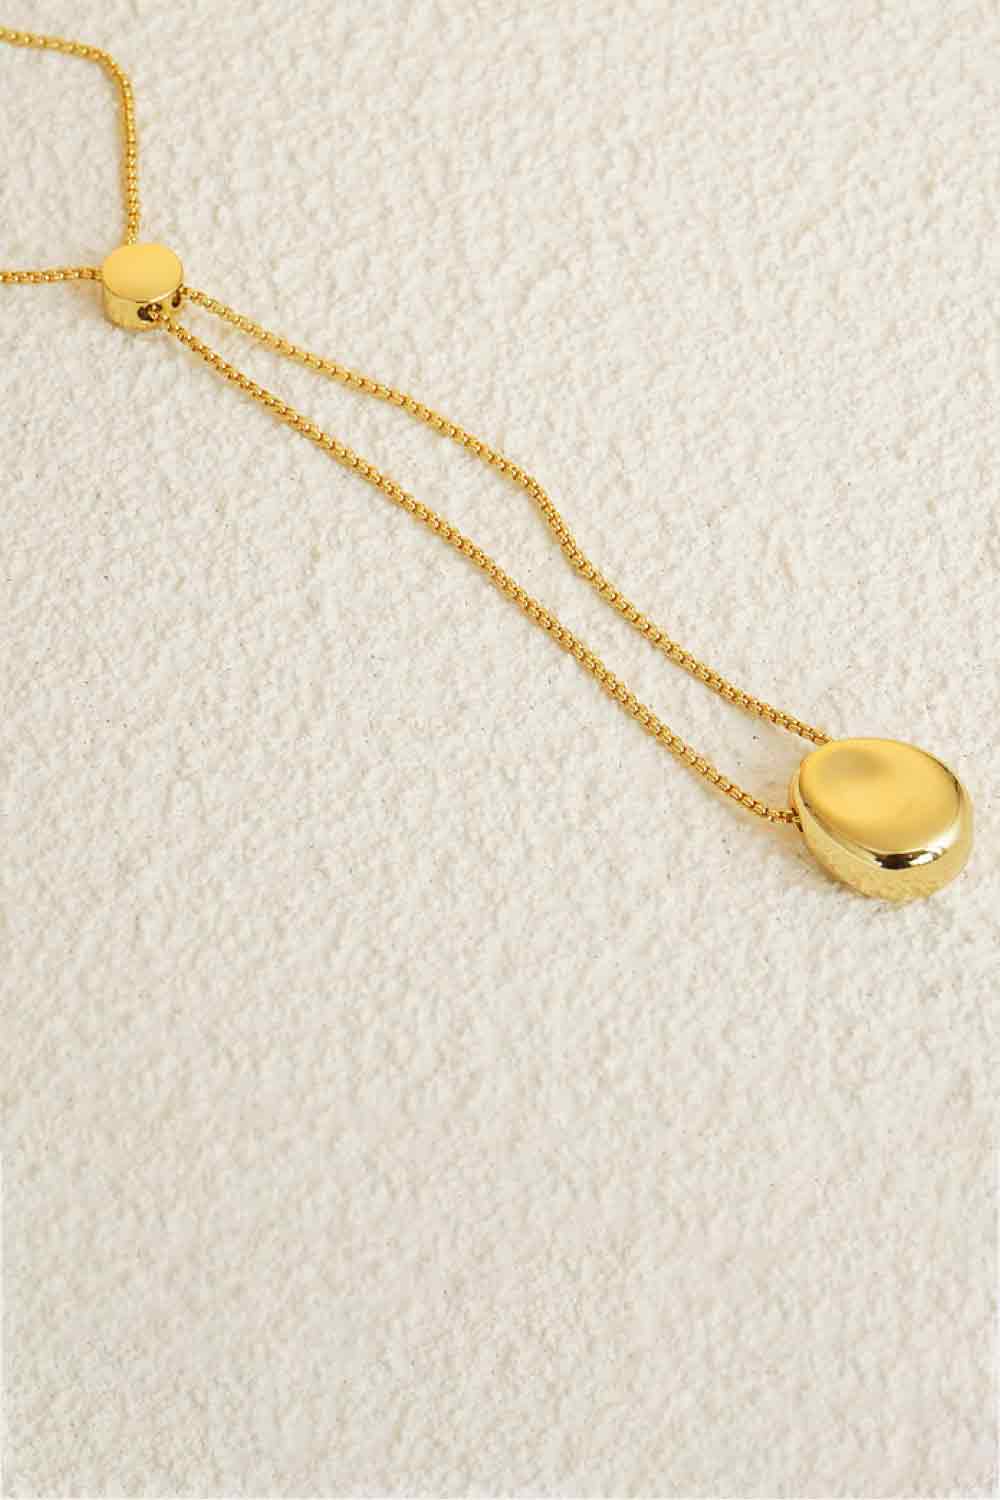 18K Gold-Plated Sweater Chain Necklace - Shah S. Sahota